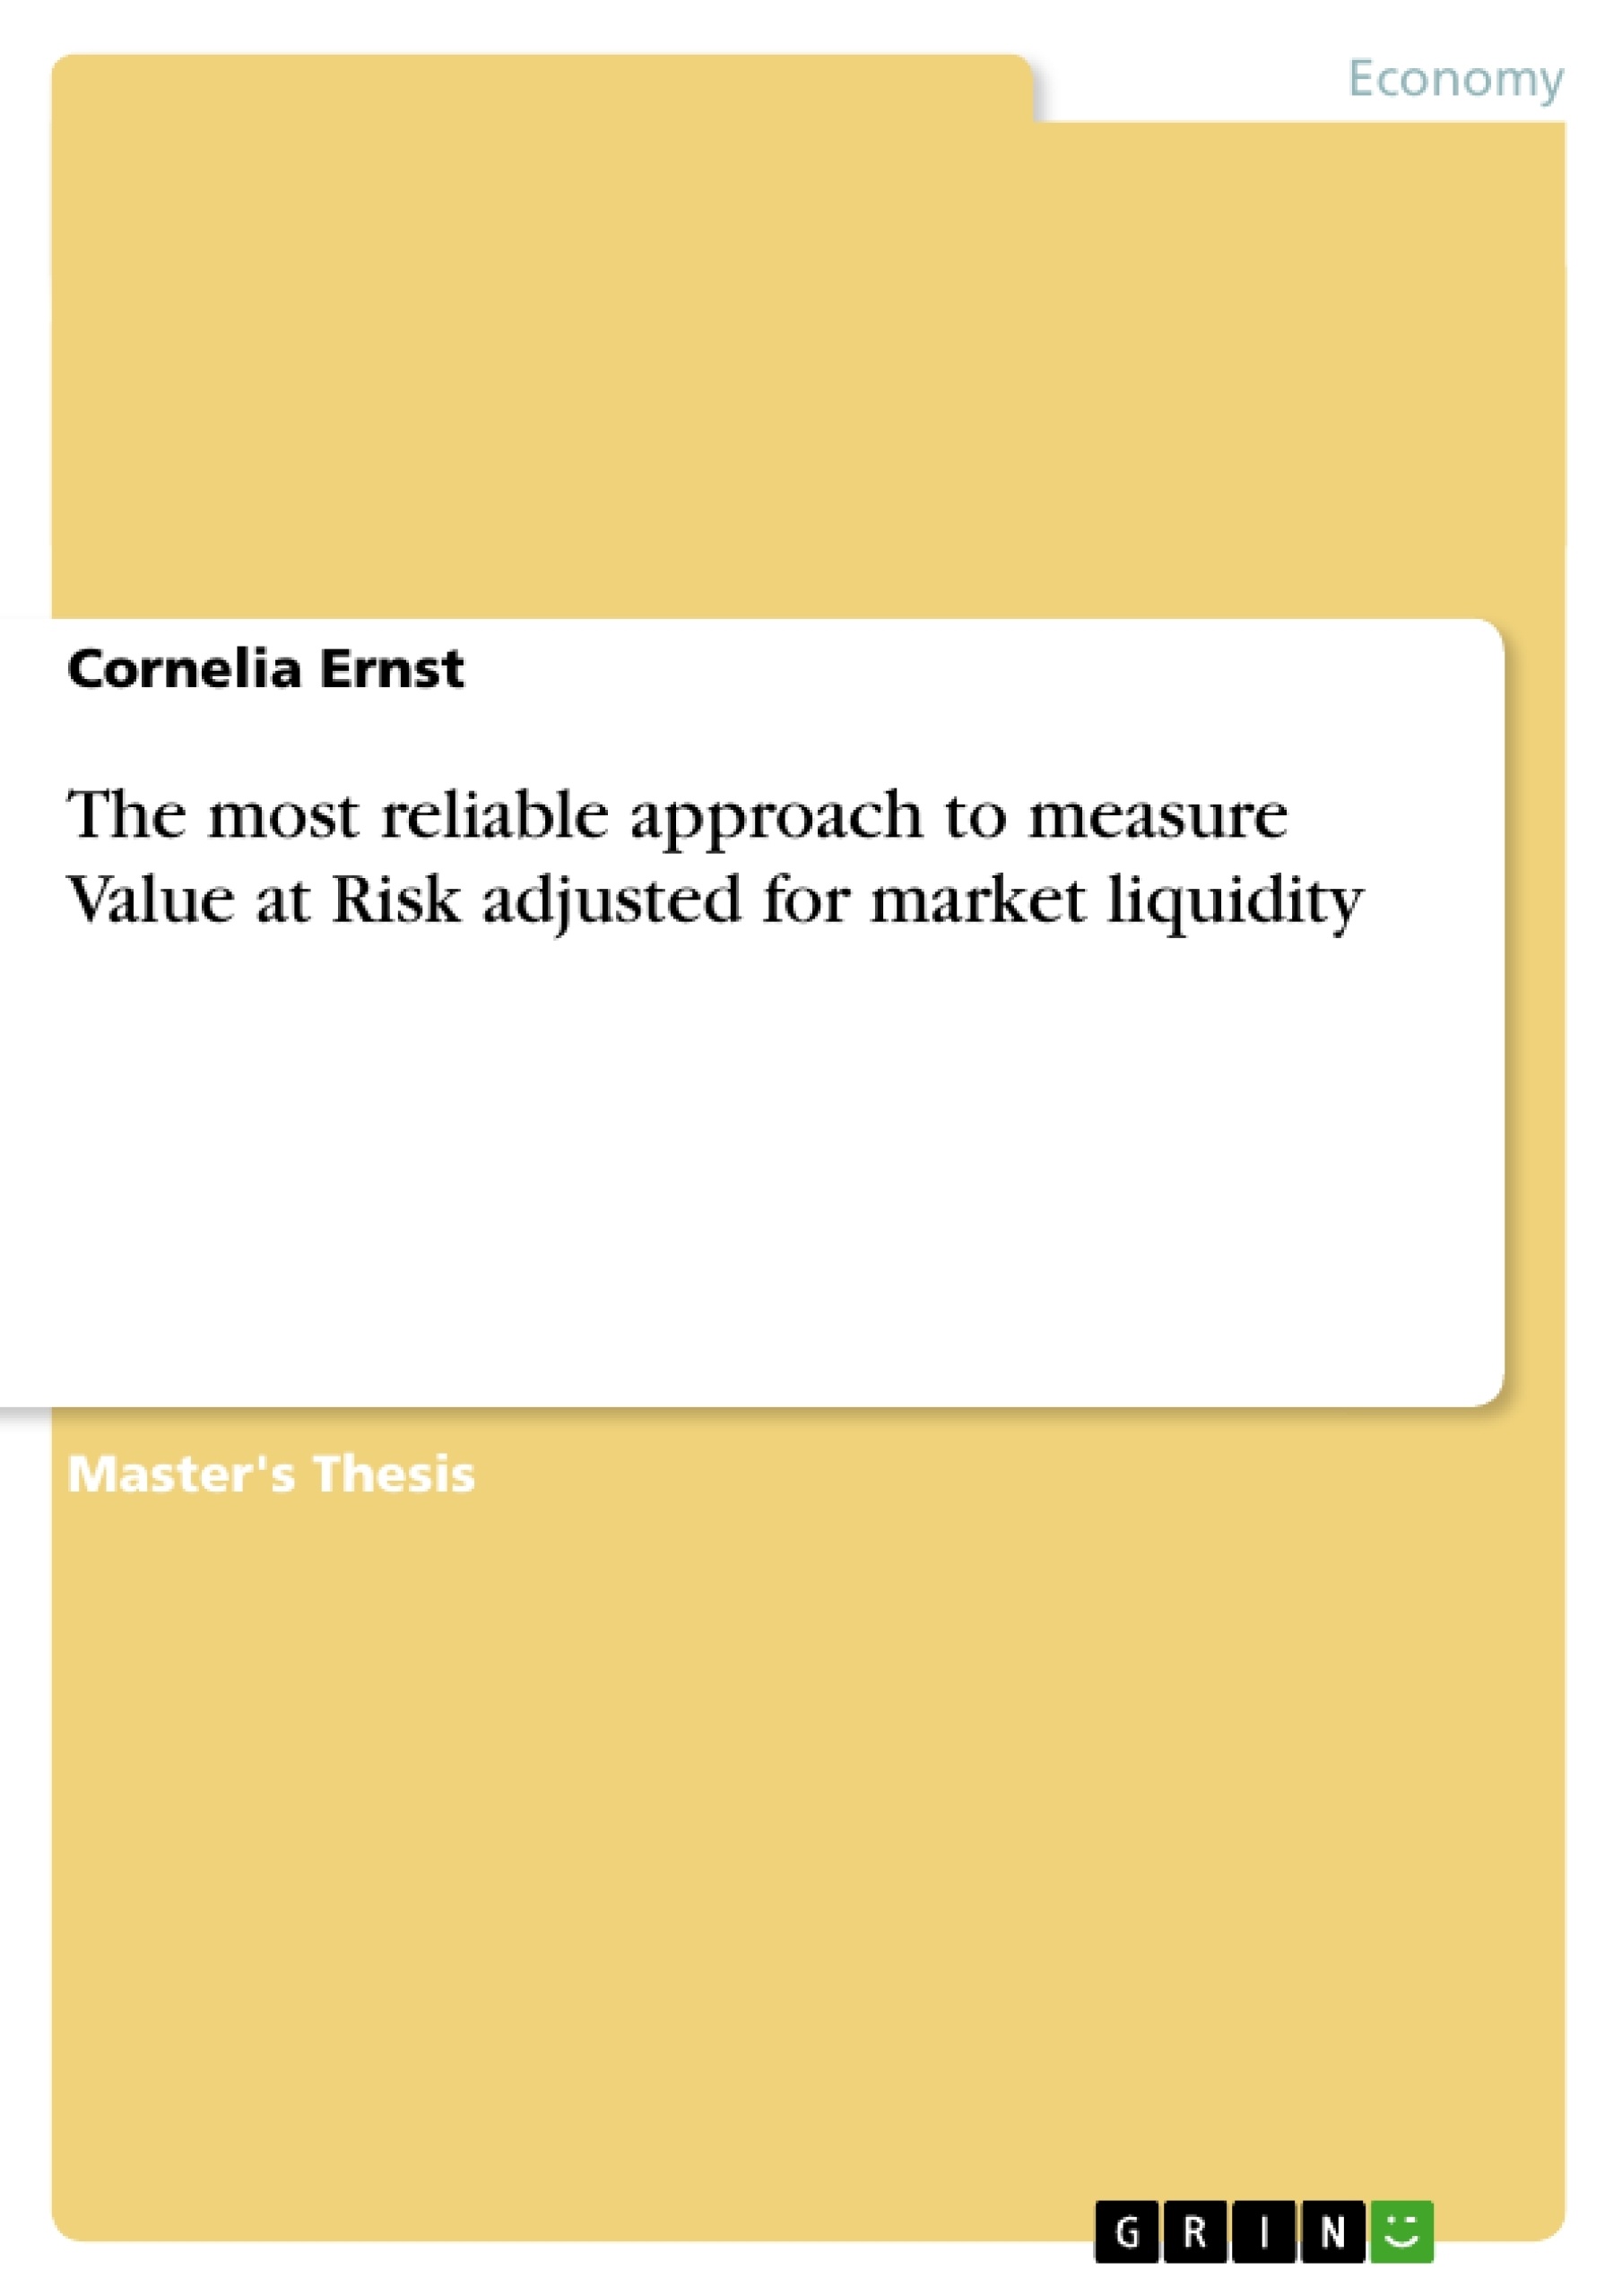 Title: The most reliable approach to measure Value at Risk adjusted for market liquidity